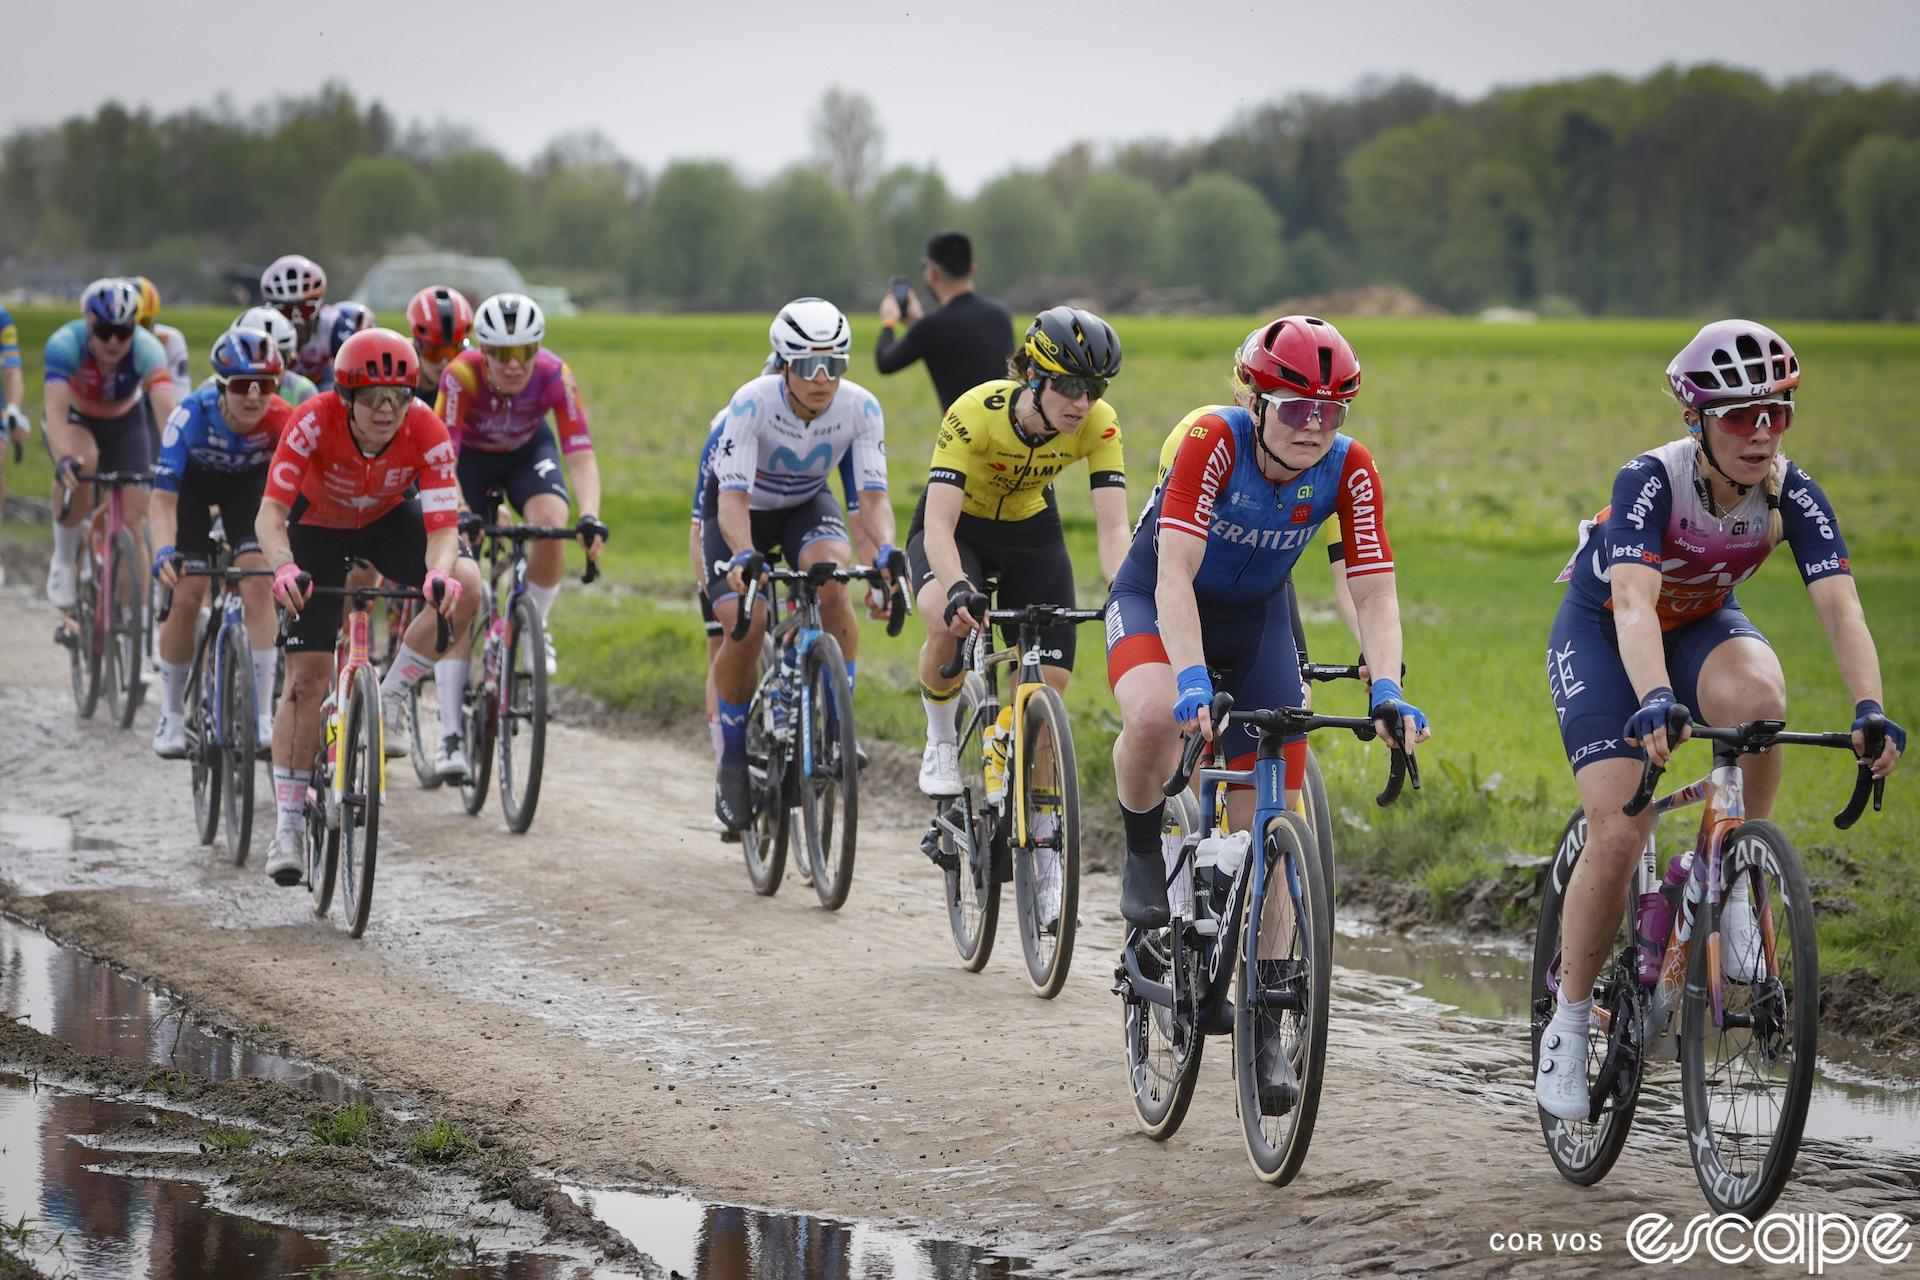 Alison Jackson rides in a group of riders on the cobbles at Paris-Roubaix.